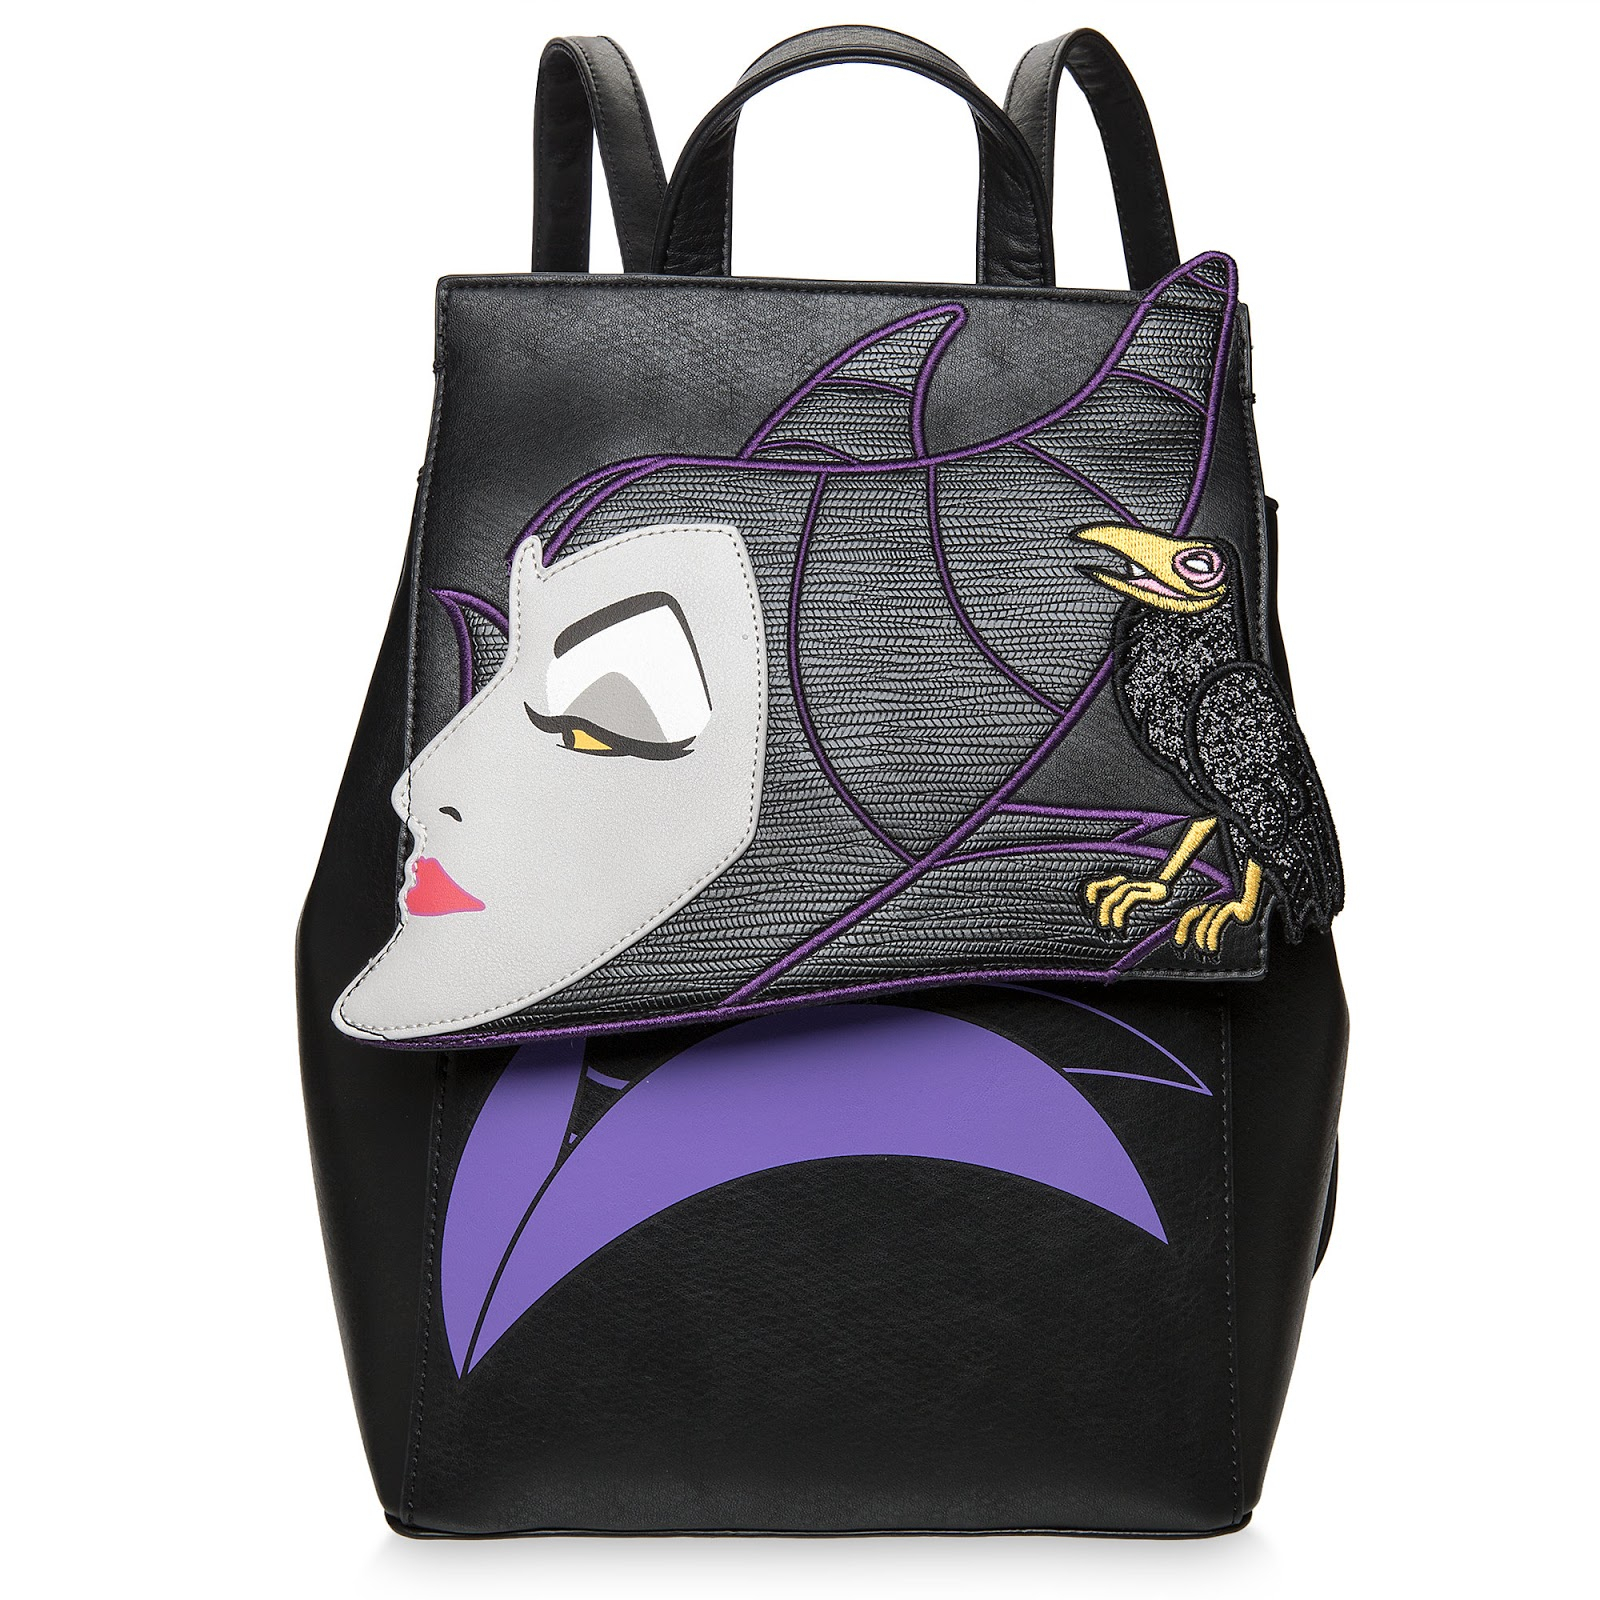 Disney Commemorates 60th Anniversary of Sleeping Beauty with New Apparel,  Accessories, and More